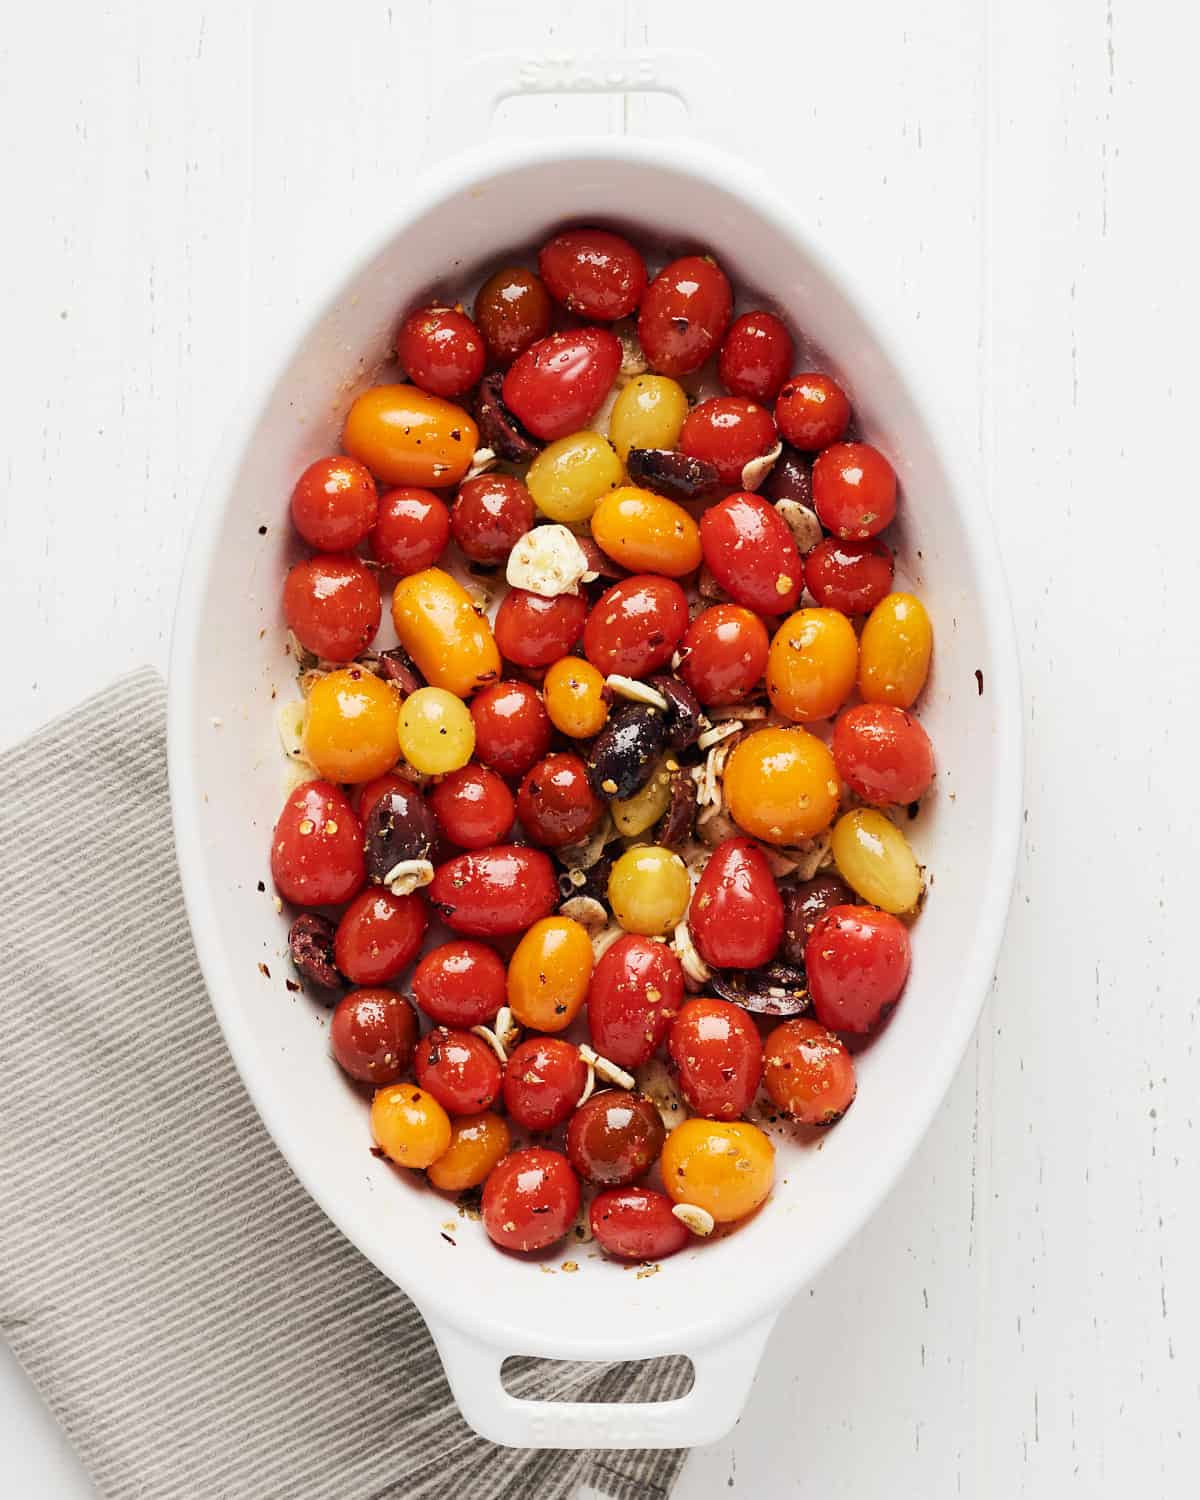 Overhead view of fresh cherry tomatoes, sliced garlic, olives, spices, oil, and herbs mixed in a baking pan.